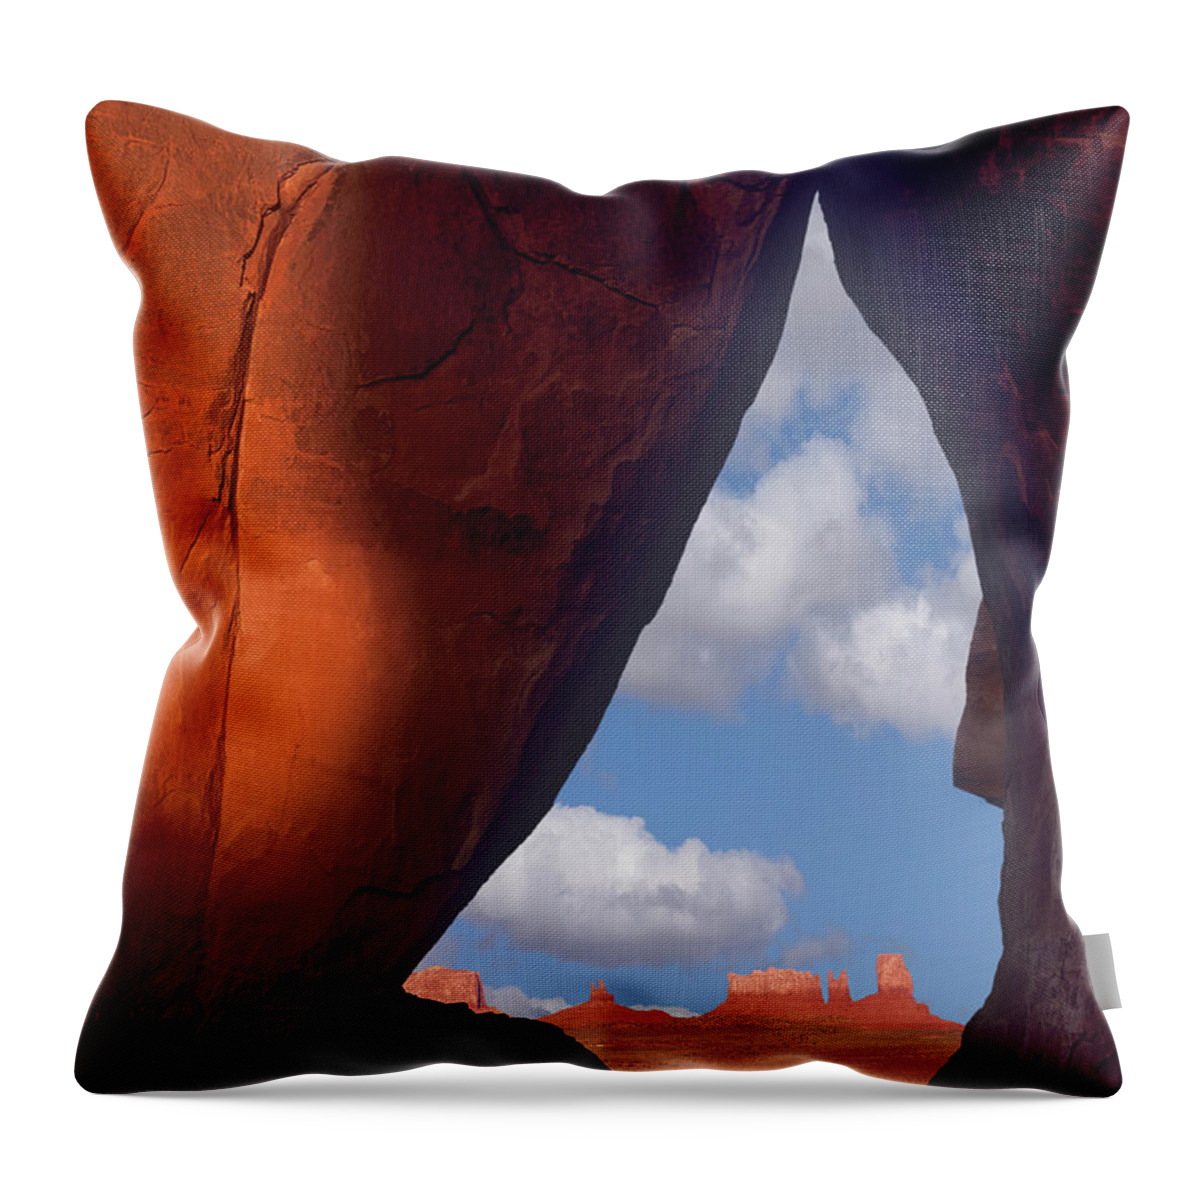 00586227 Throw Pillow featuring the photograph Teardrop Arch And Buttes, Monument Valley, Arizona by Tim Fitzharris